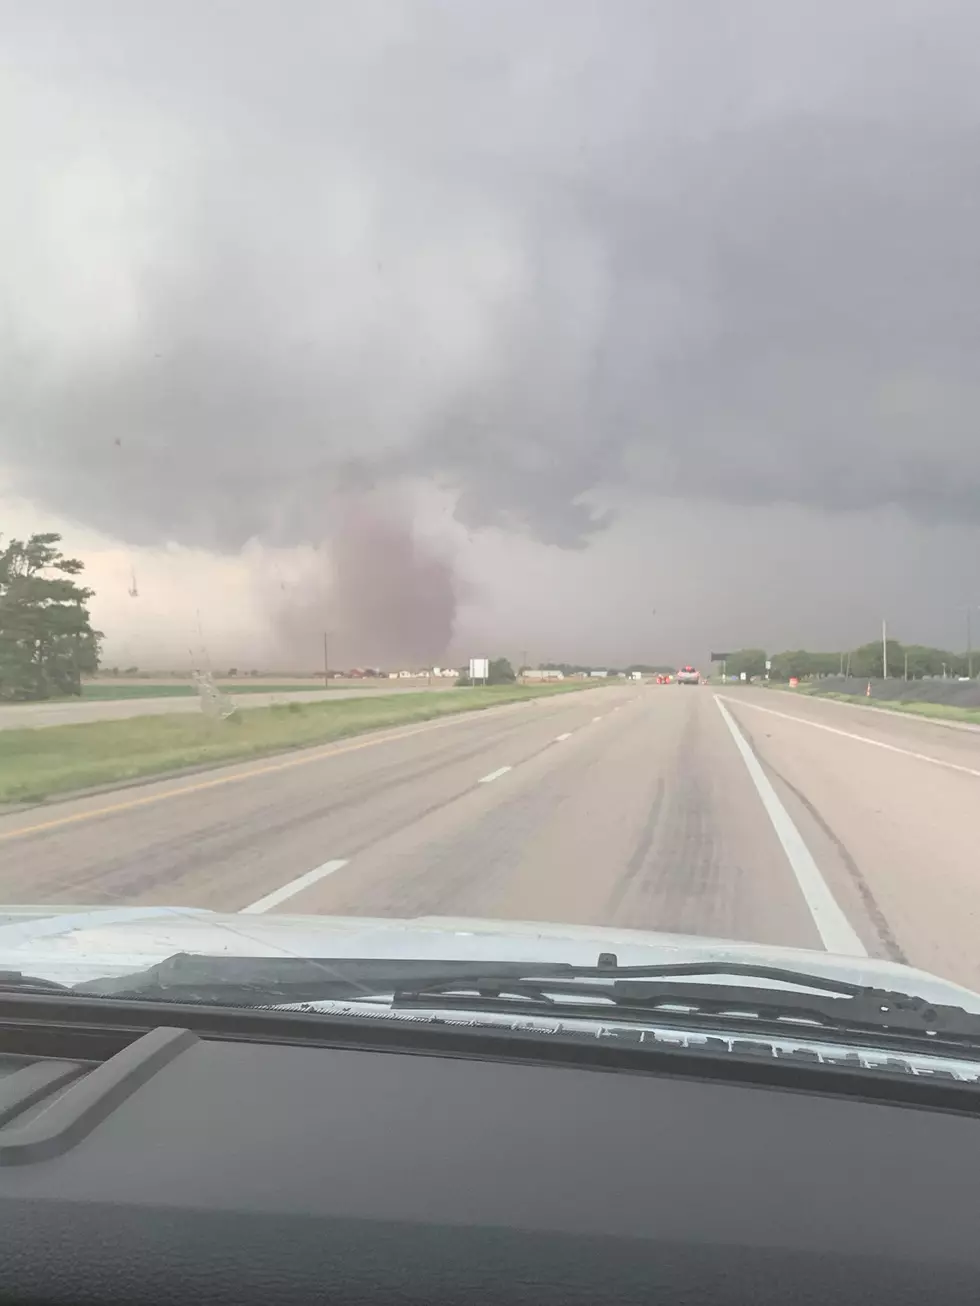 Could Lubbock Be Hit With Another Tornado?